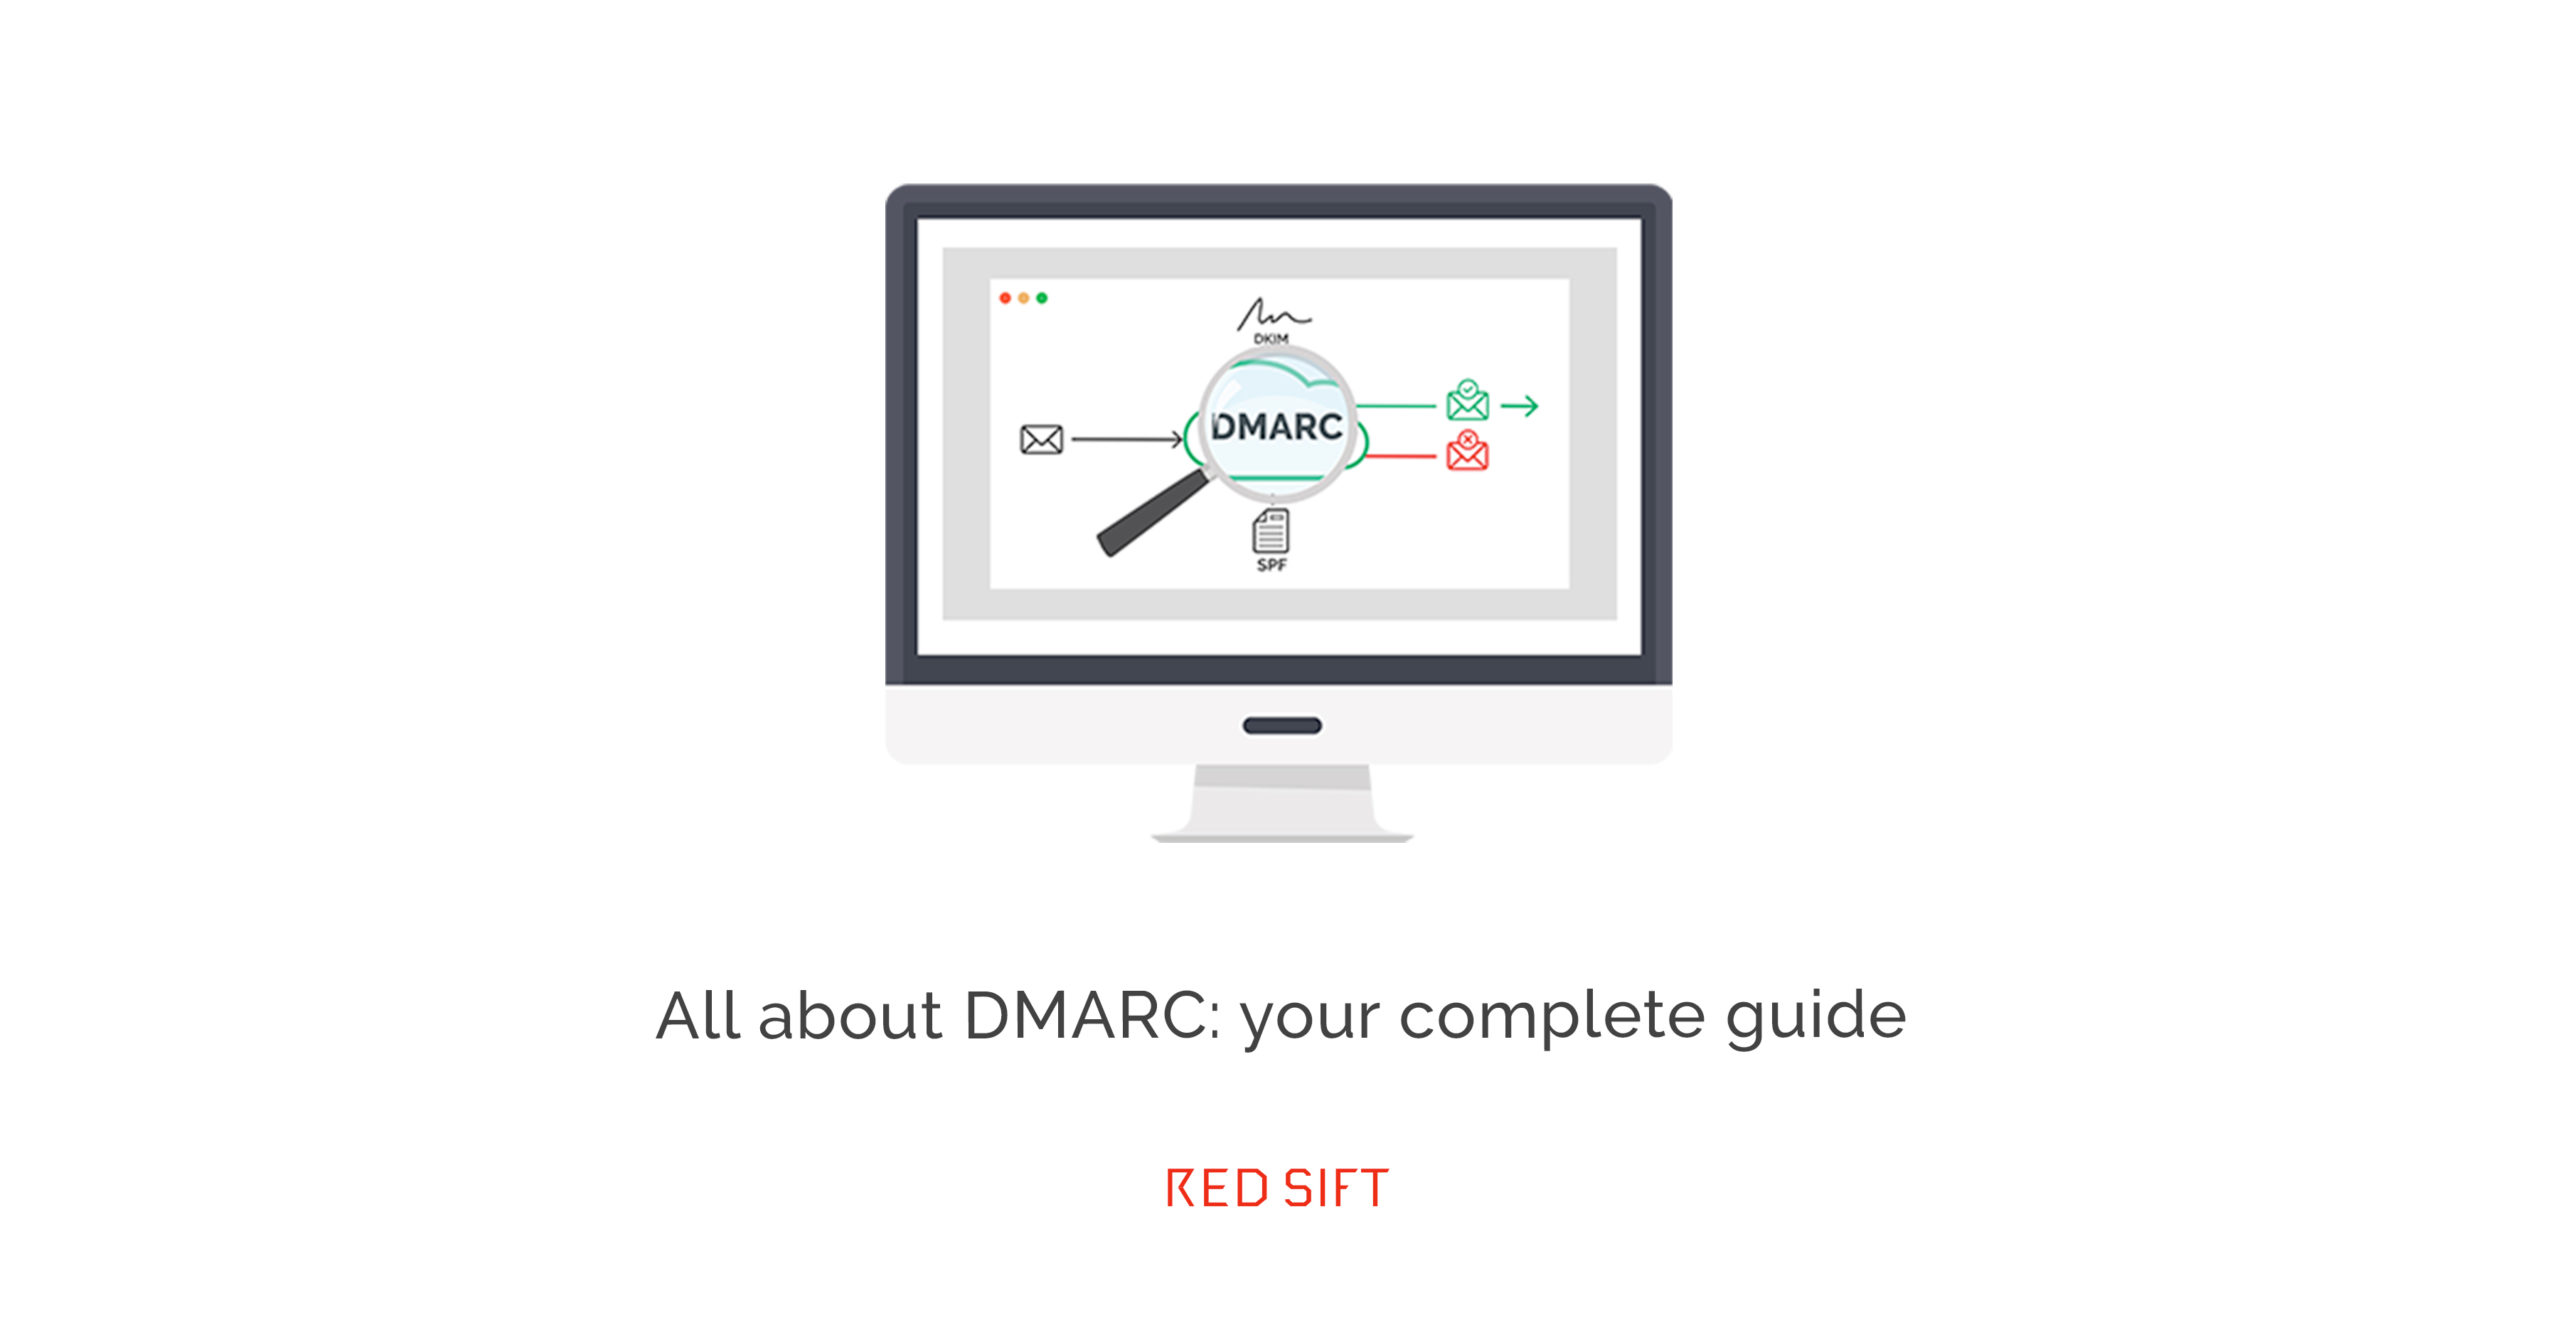 A beginner's guide to DMARC